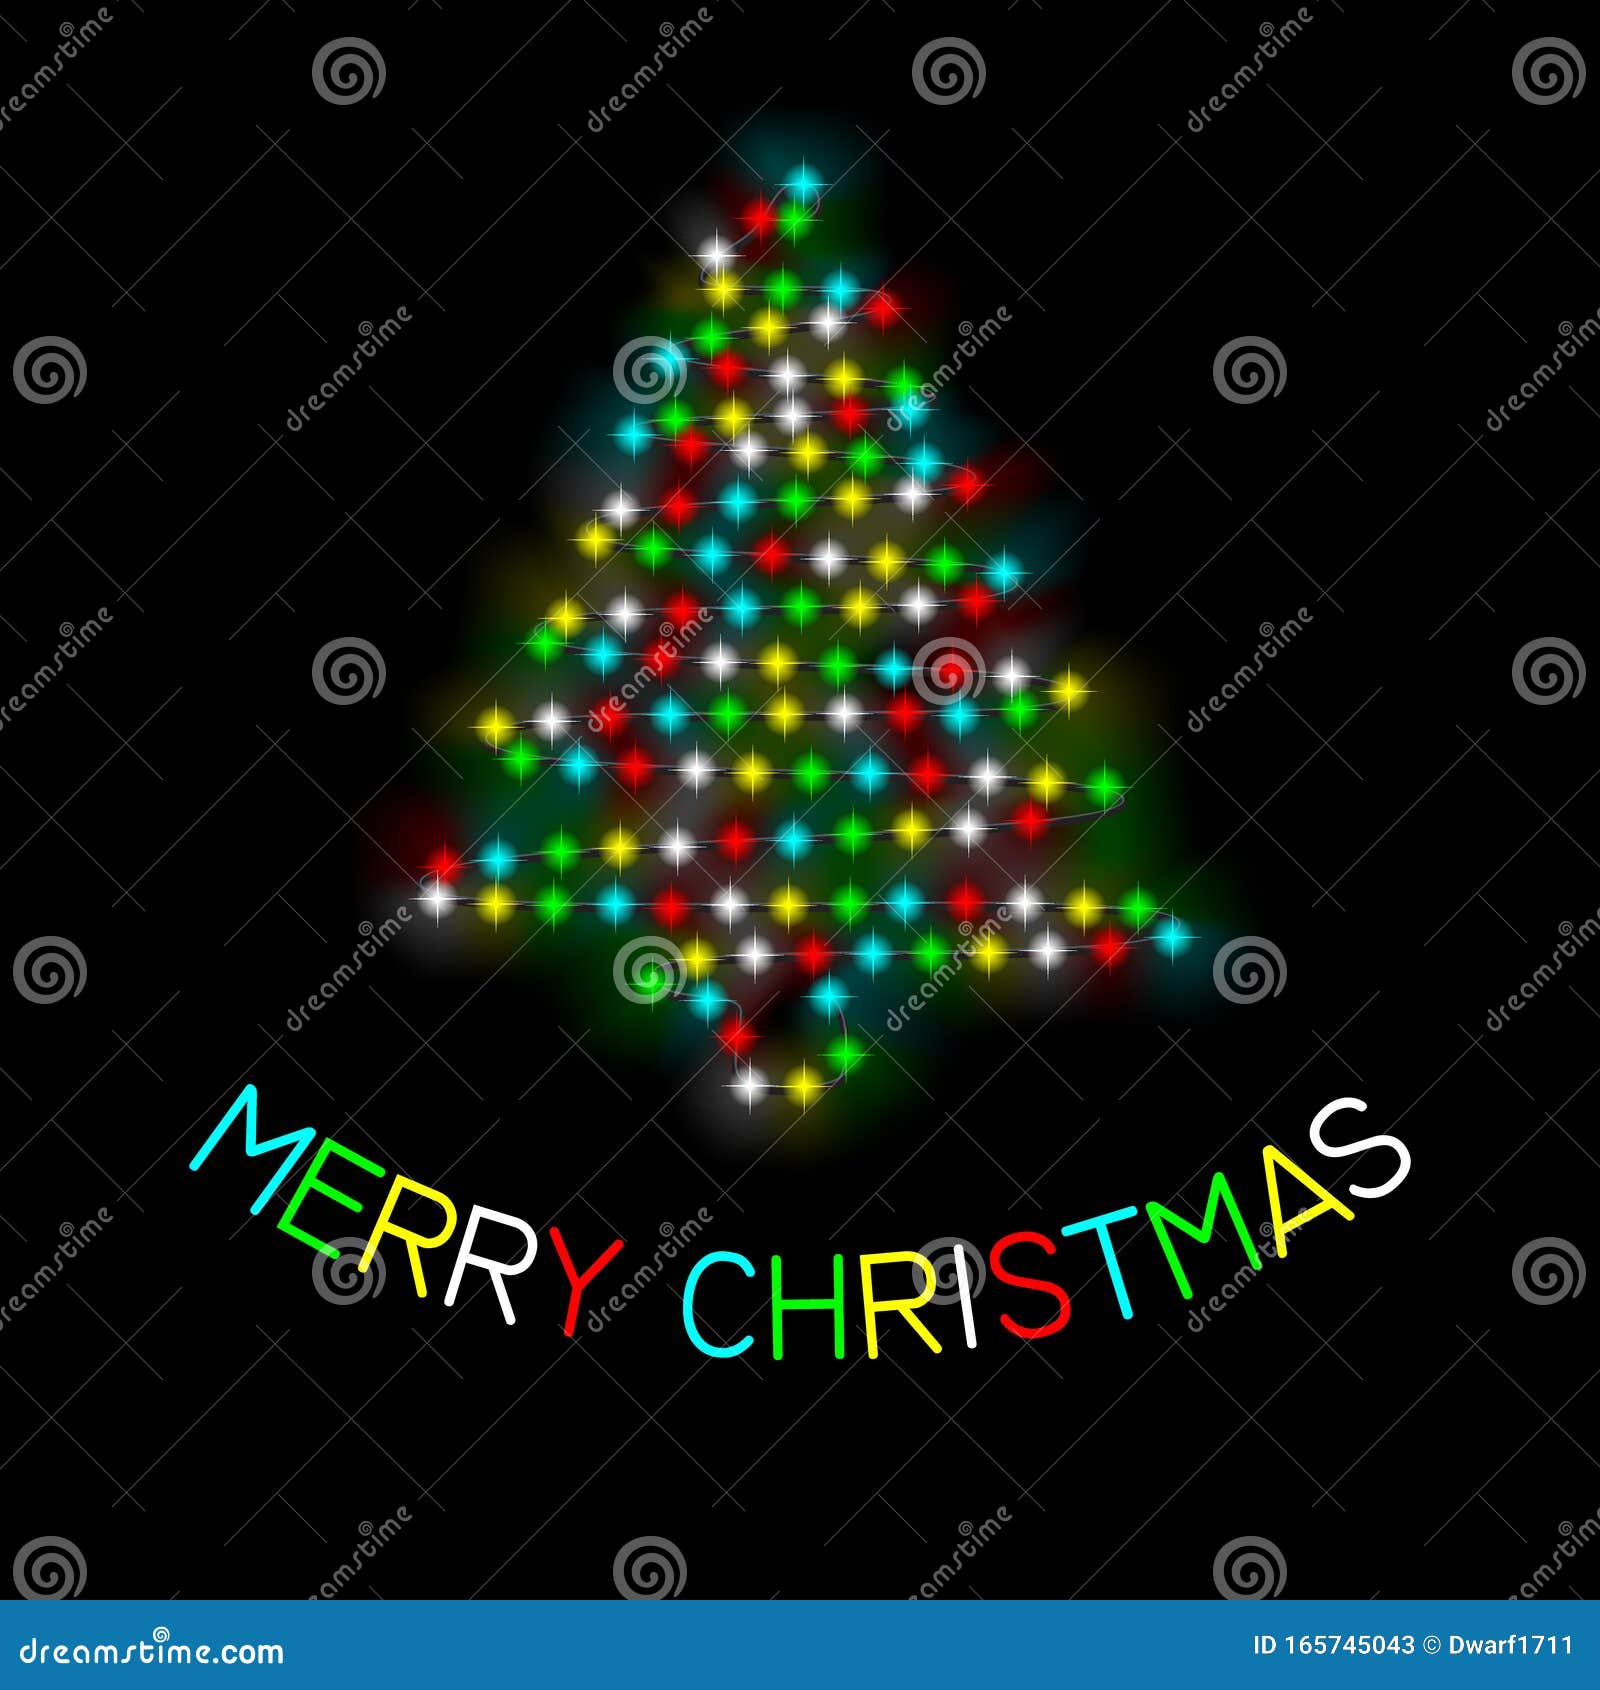 Social network post or square banner vector template with colored lights in the form of Christmas tree and colored Merry Christmas lettering on black background.